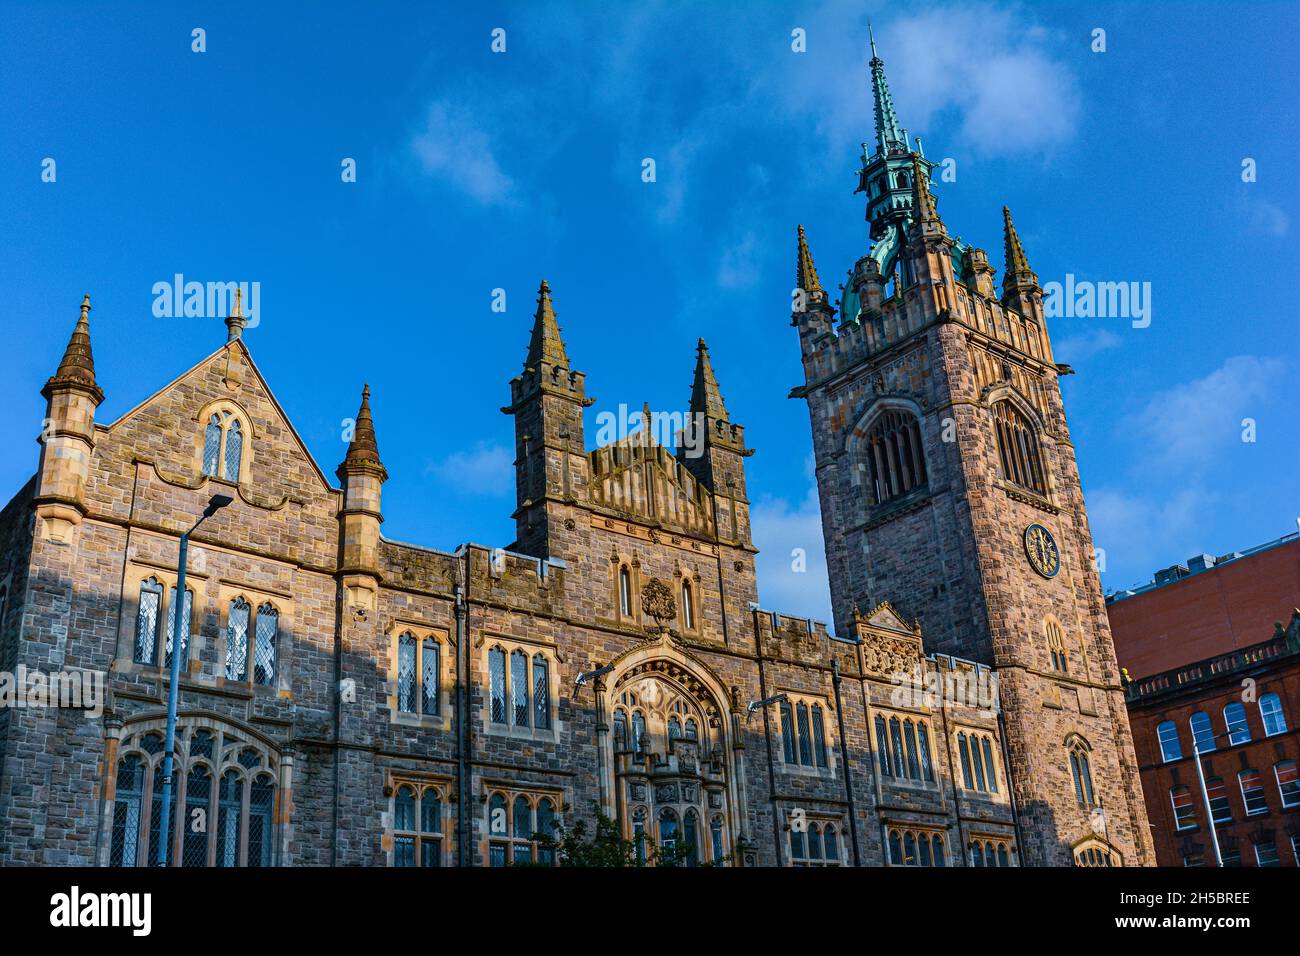 Belfast,Northern Ireland,United Kingdom - September 2, 2021: The exterior of the Memorial Church Stock Photo